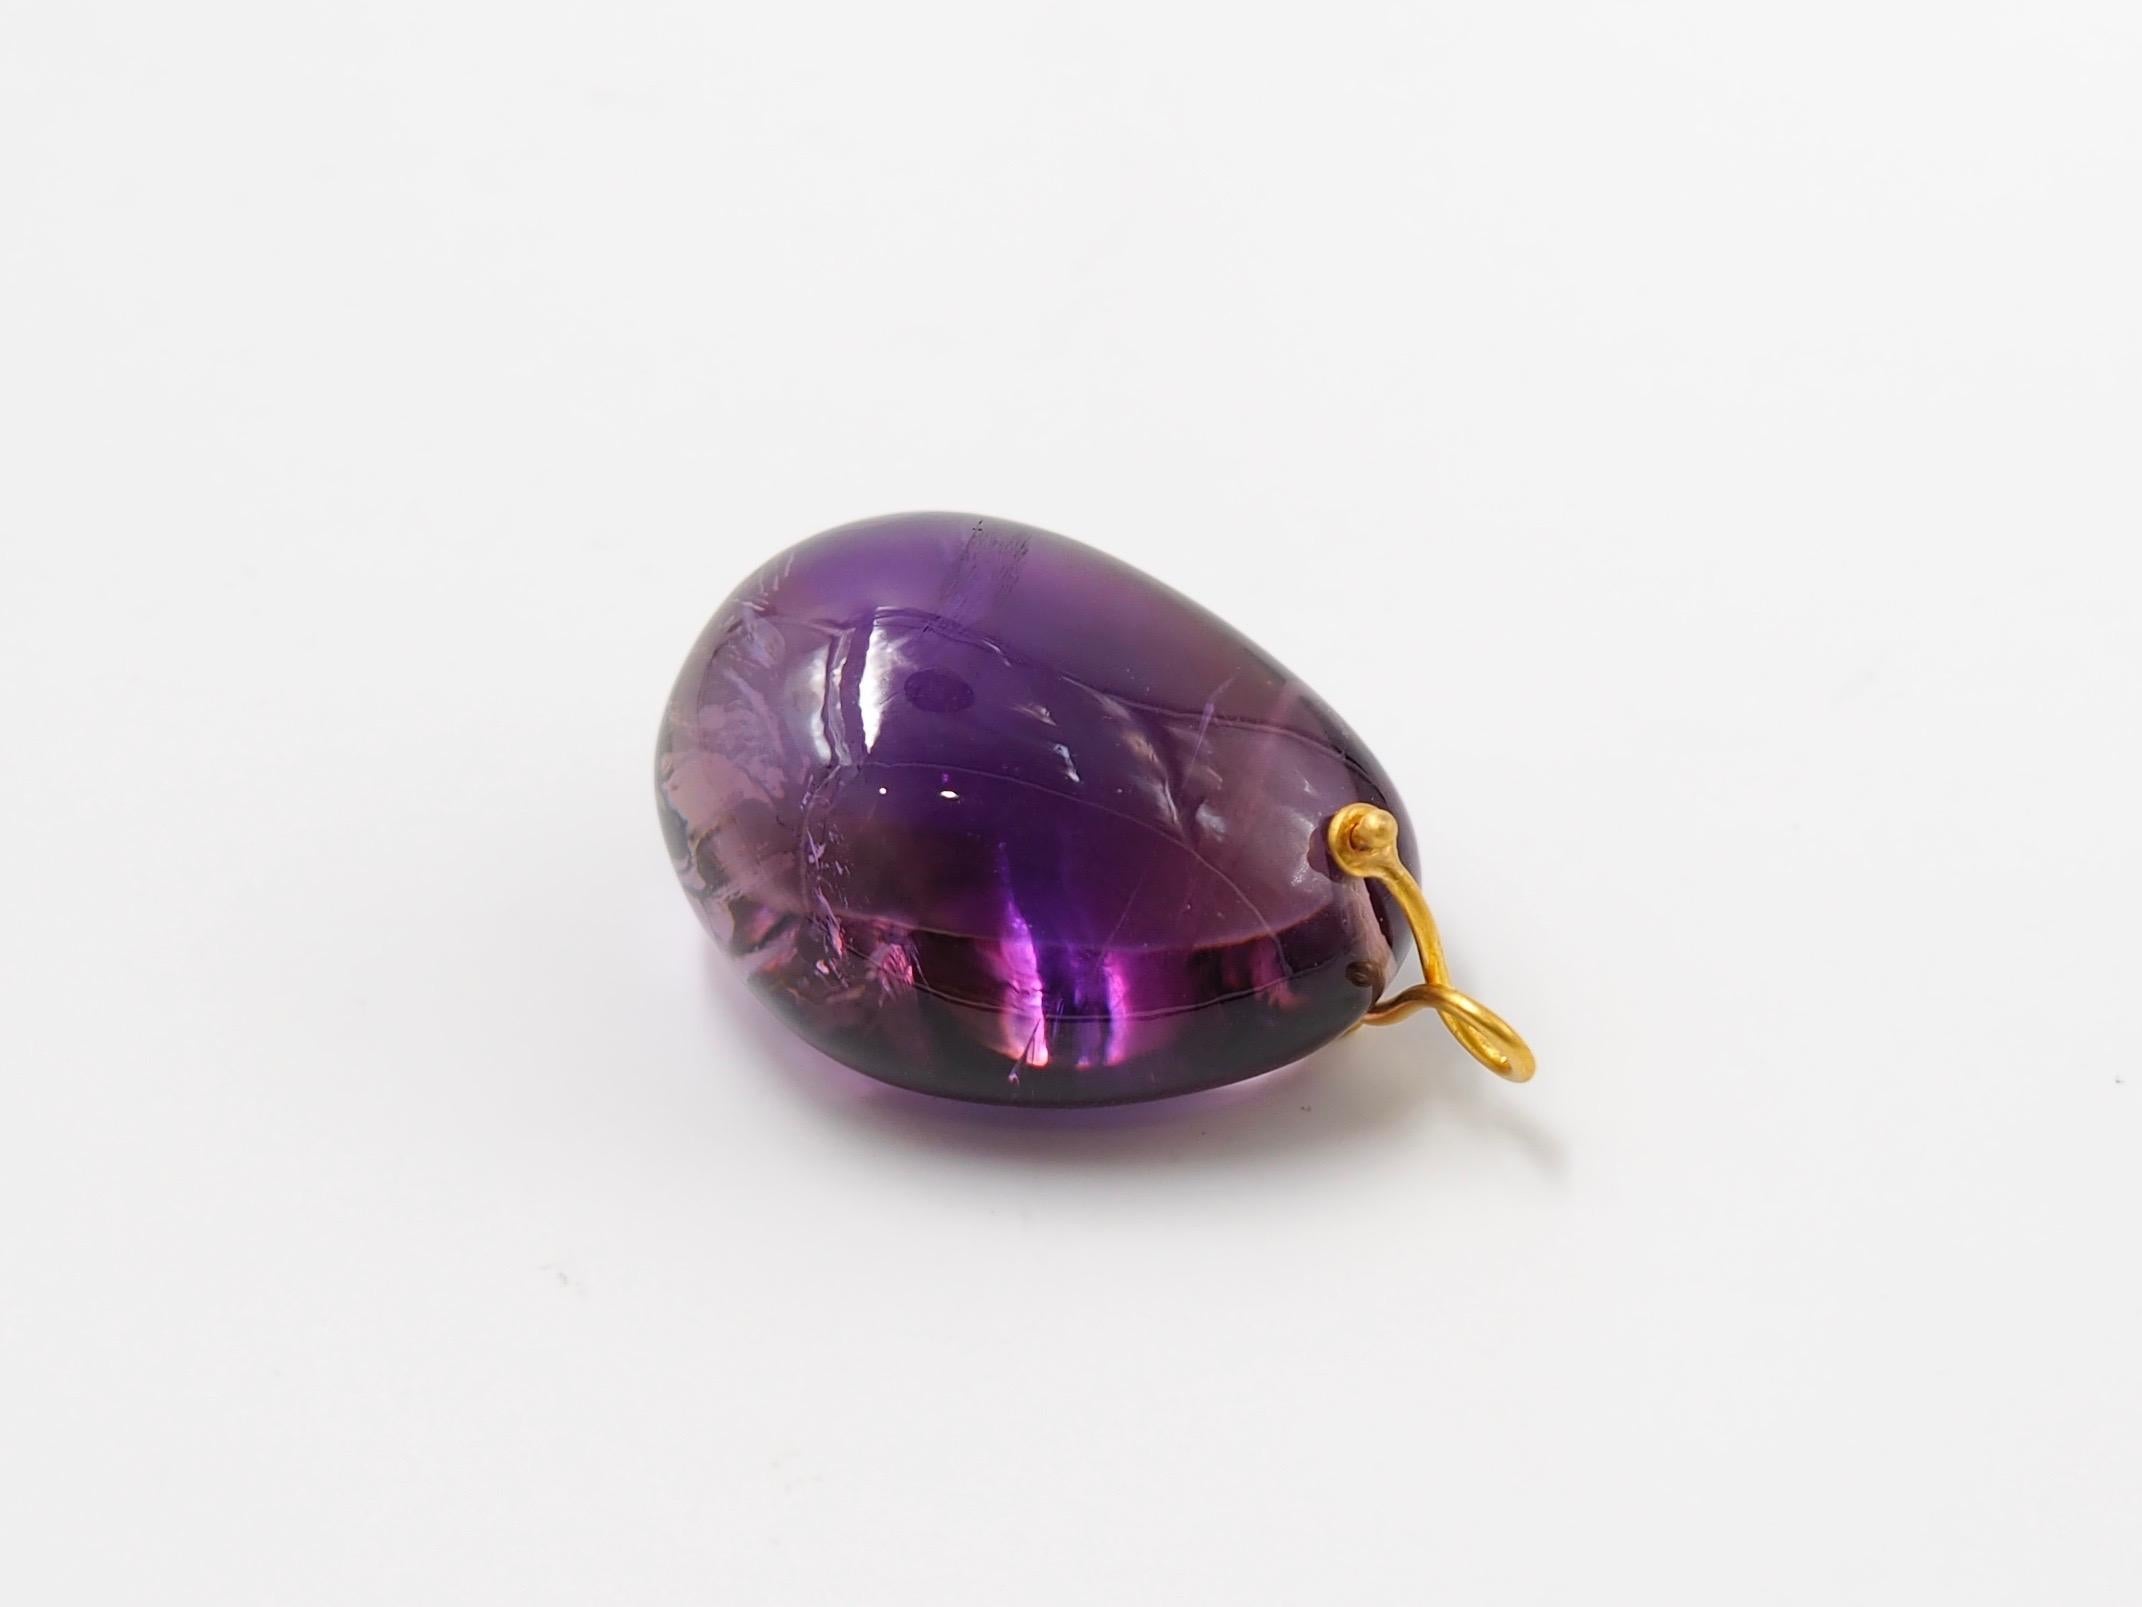 Hand-carved and handmade pendant, this stone is simply drilled to allow a 22 karat gold wire that is twisted to make a ring. 
The largest one, which is presented in the photos, has an amethyst of approx 160 carats. This amethyst has 2 tones of